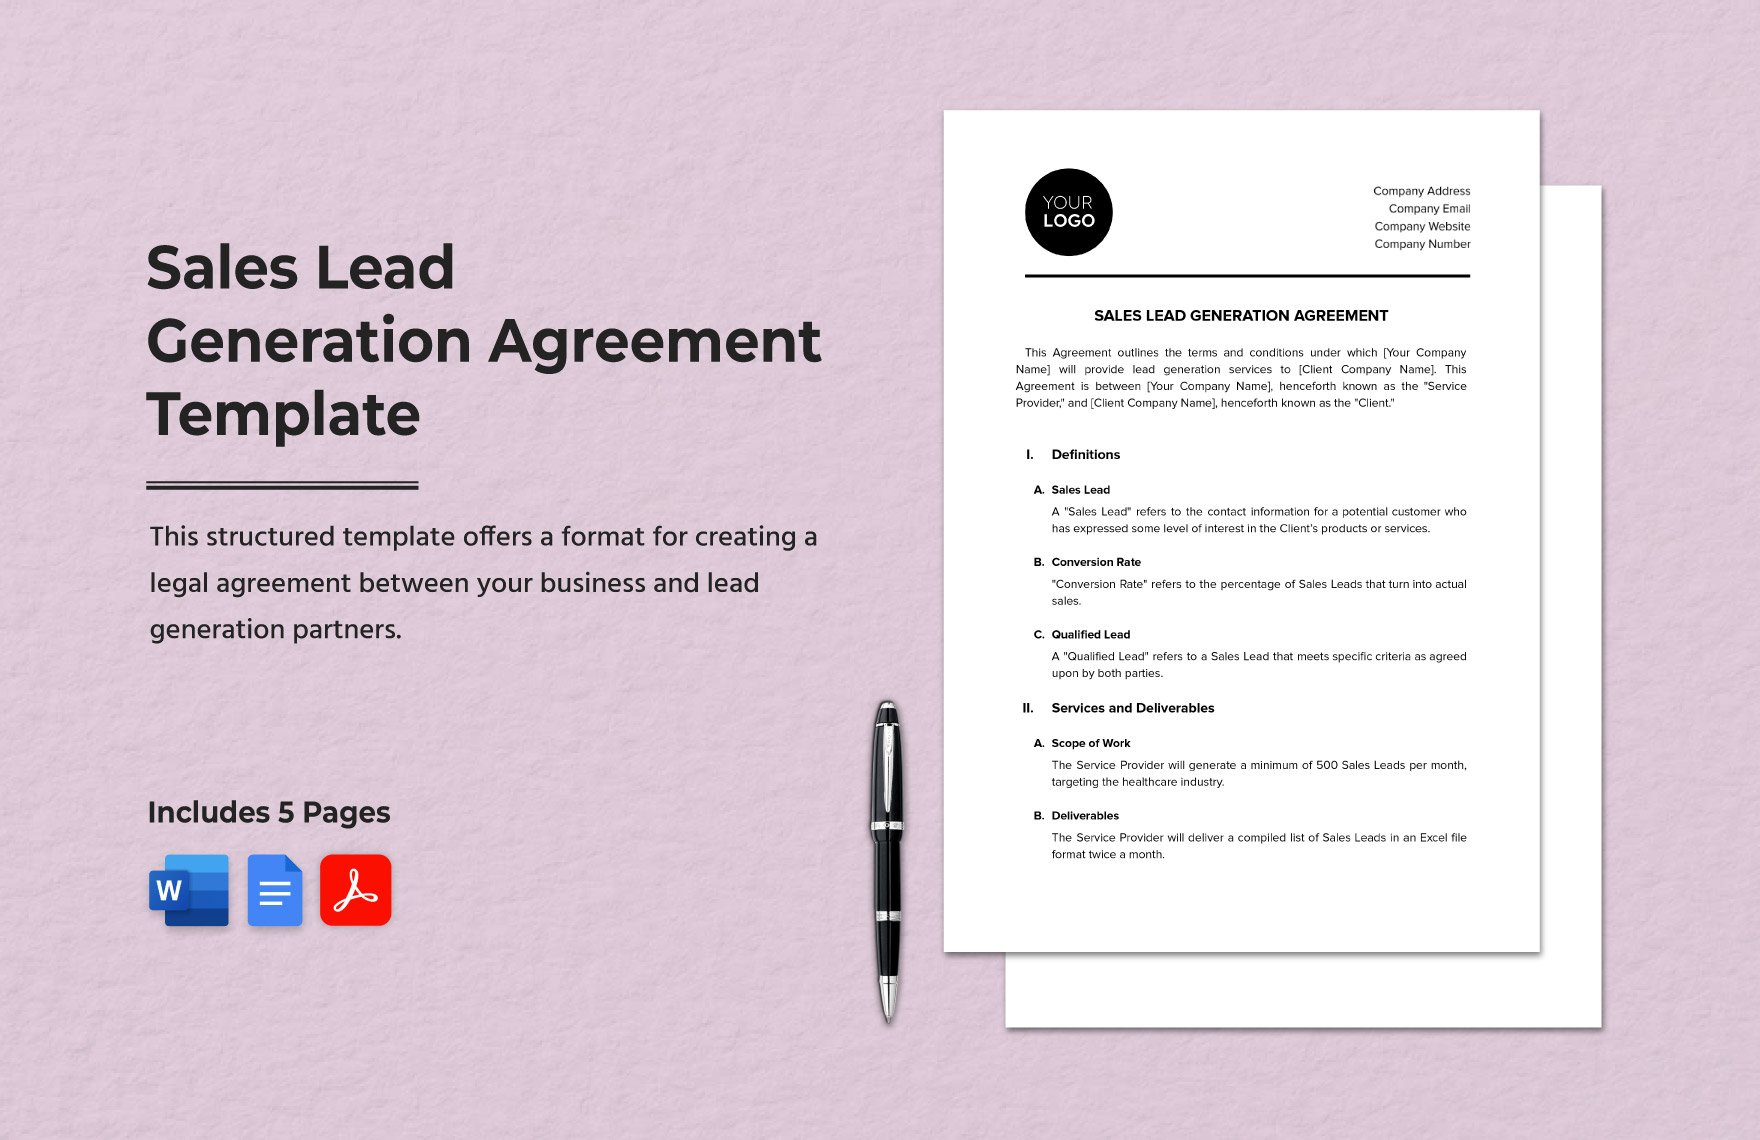 Sales Lead Generation Agreement Template in Word, Google Docs, PDF